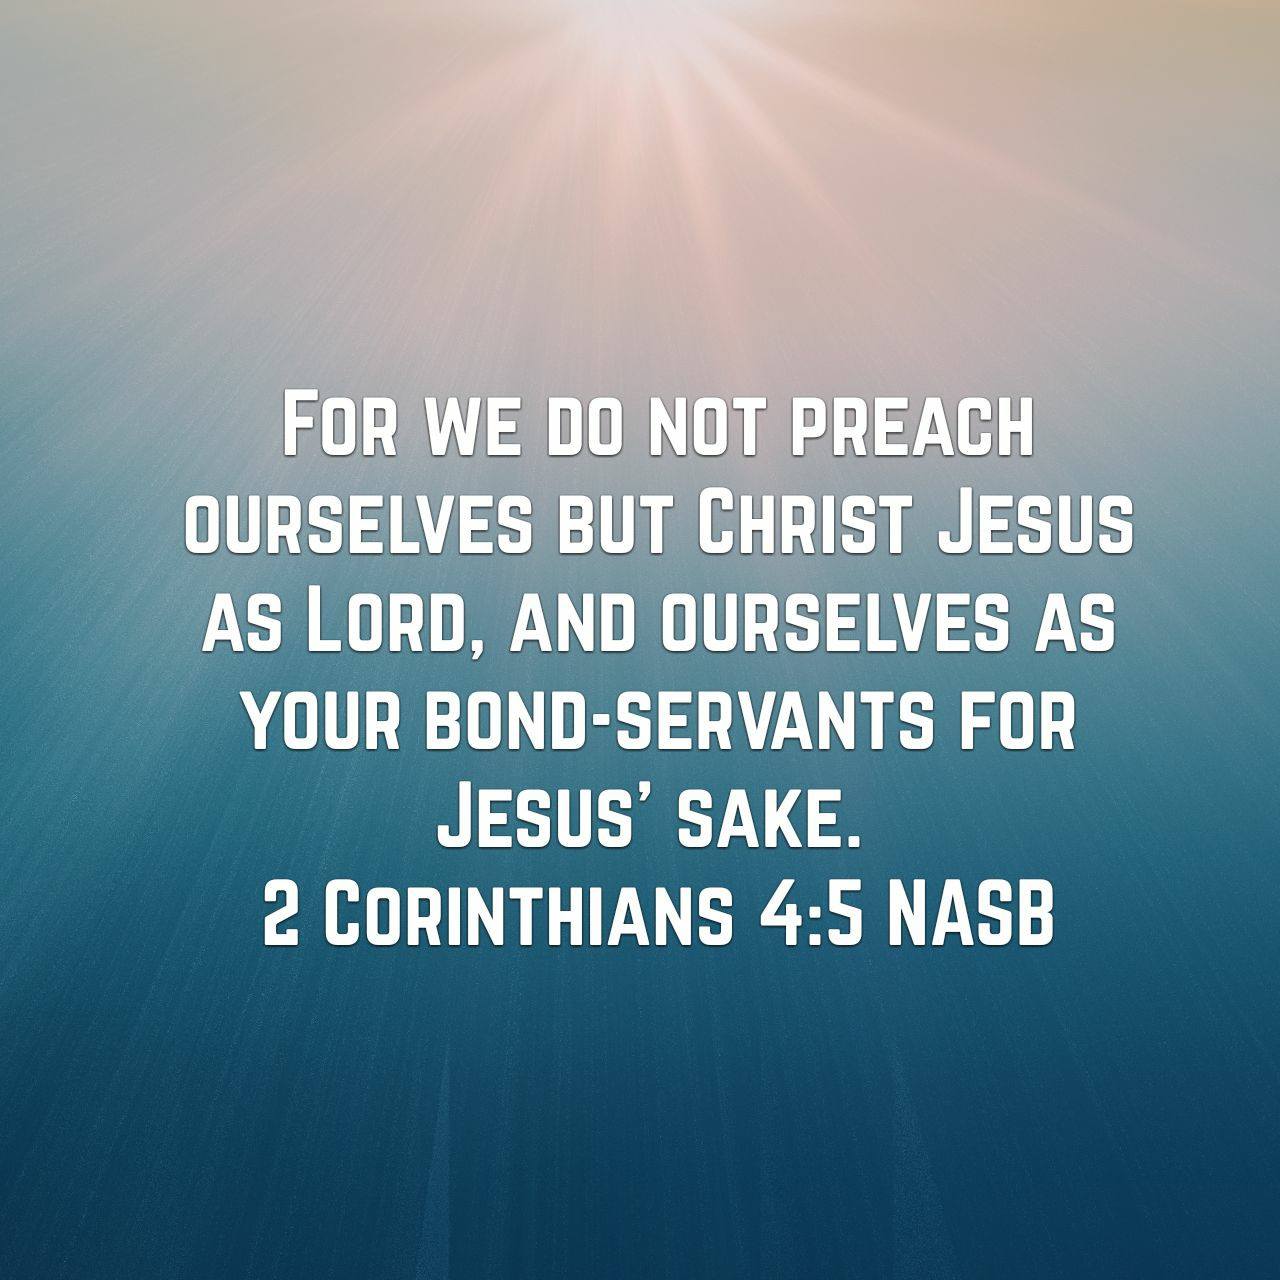 We Preach Jesus Christ Crucified and Resurrected!